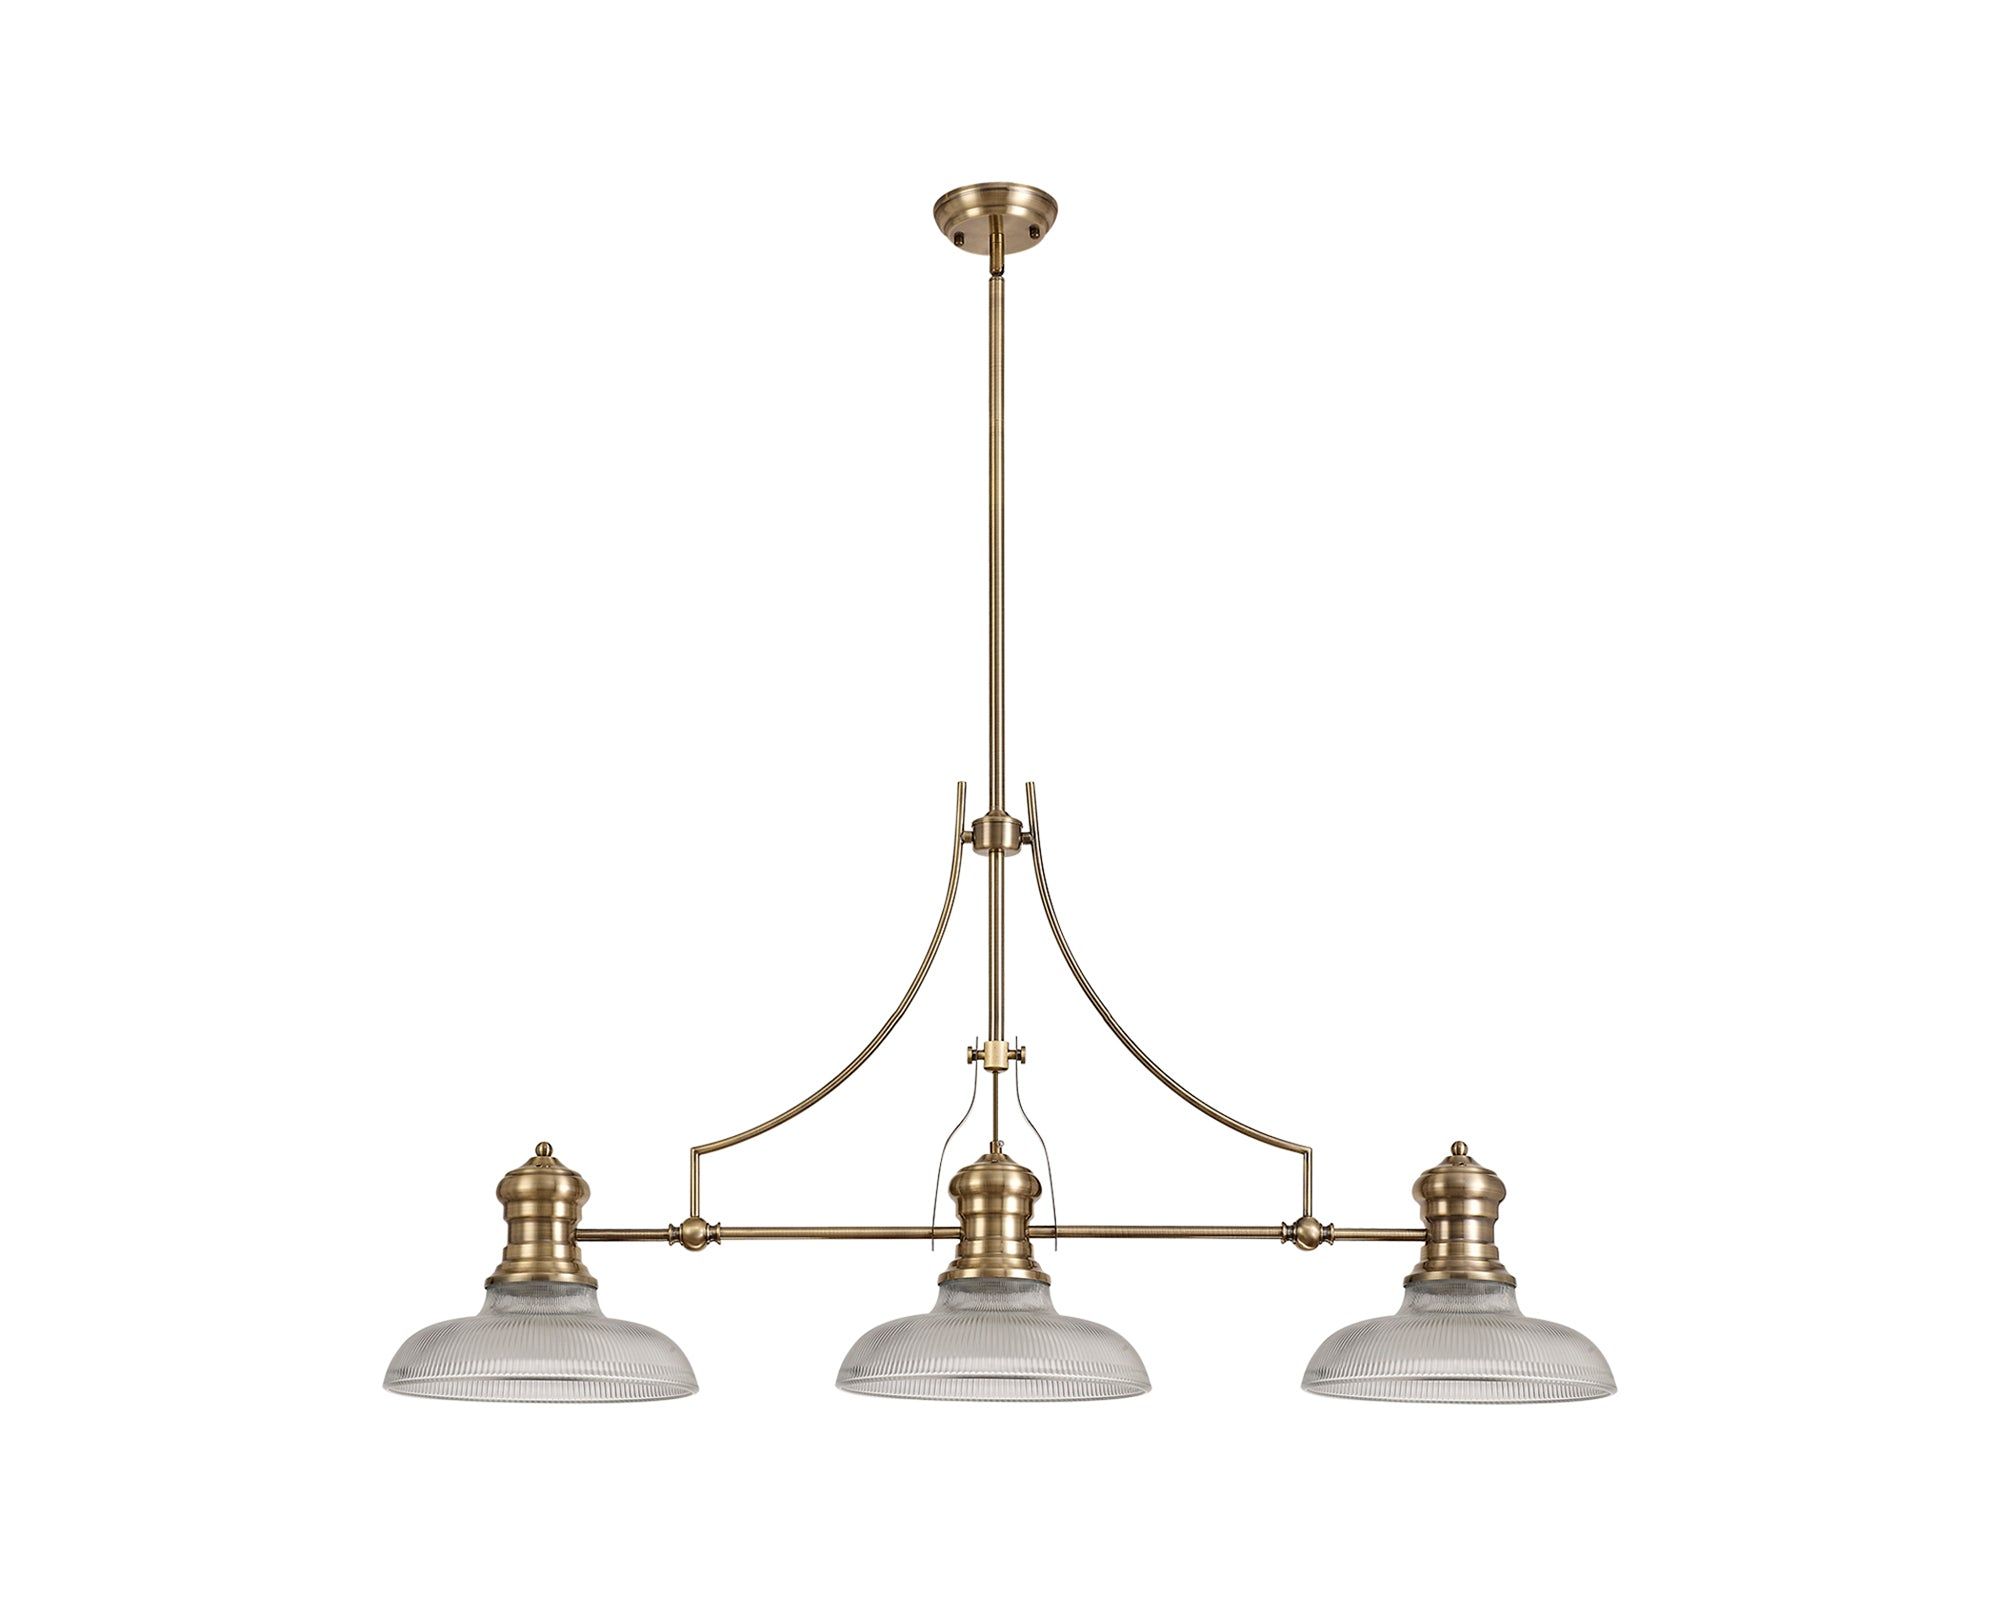 Savannah 3 Light Linear Pendant E27 With 30cm Round Glass Shade, Antique Brass, Clear